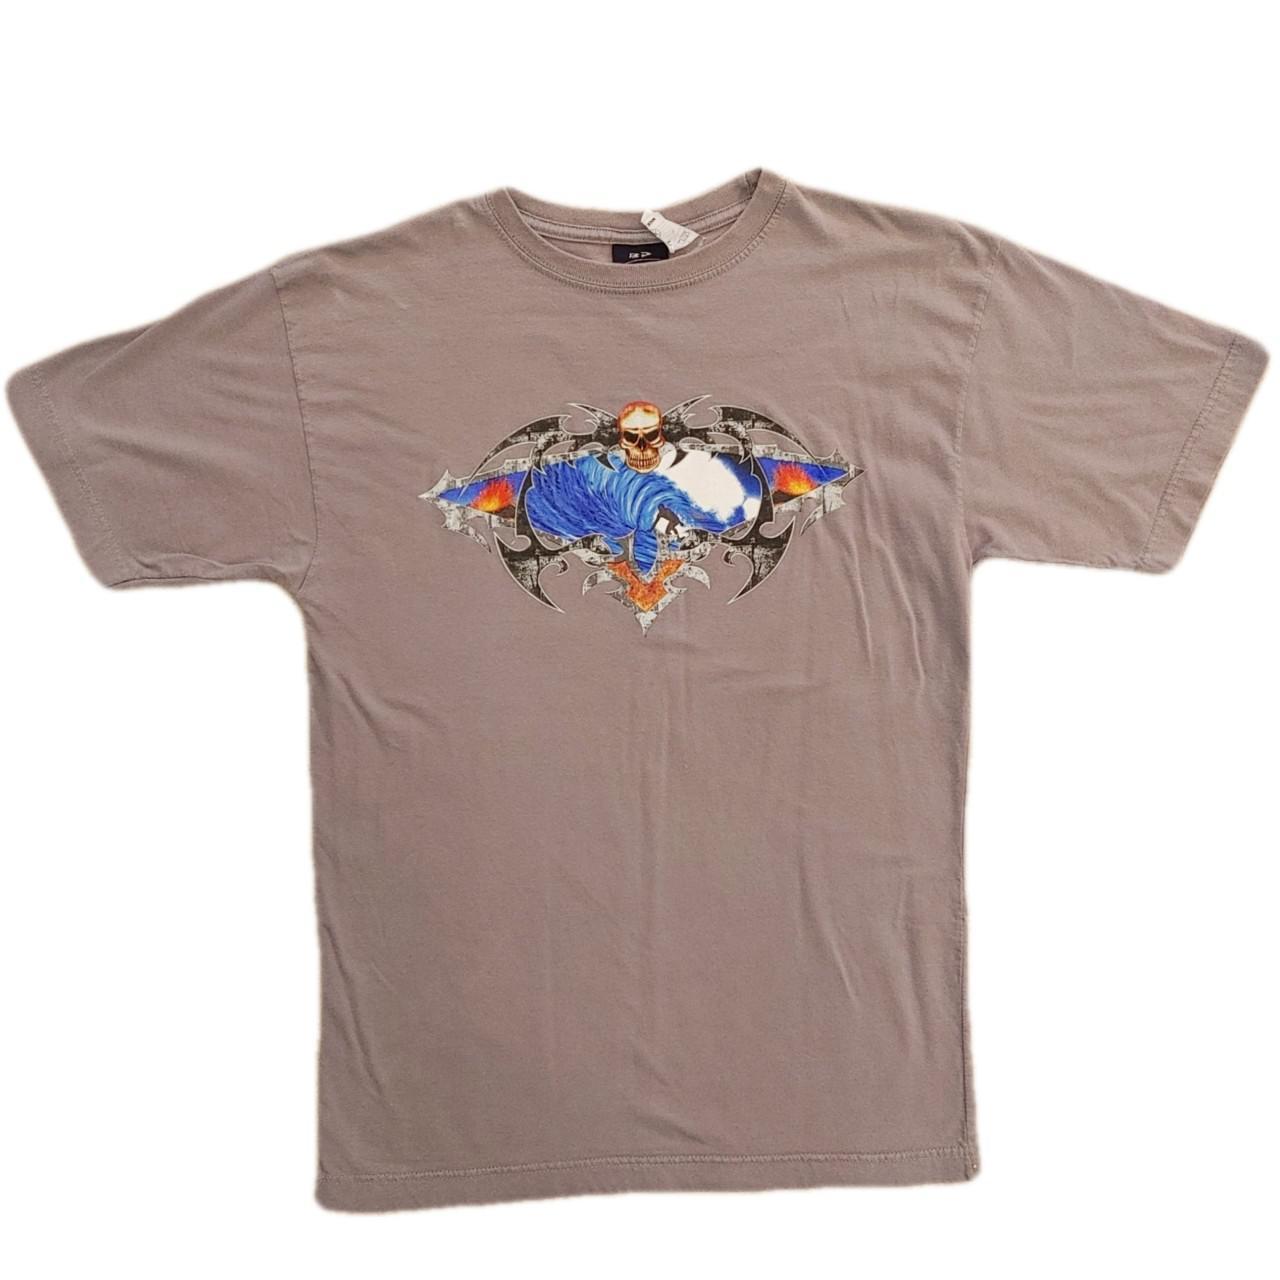 Product Image 1 - Bailey's Point Y2K tshirt size